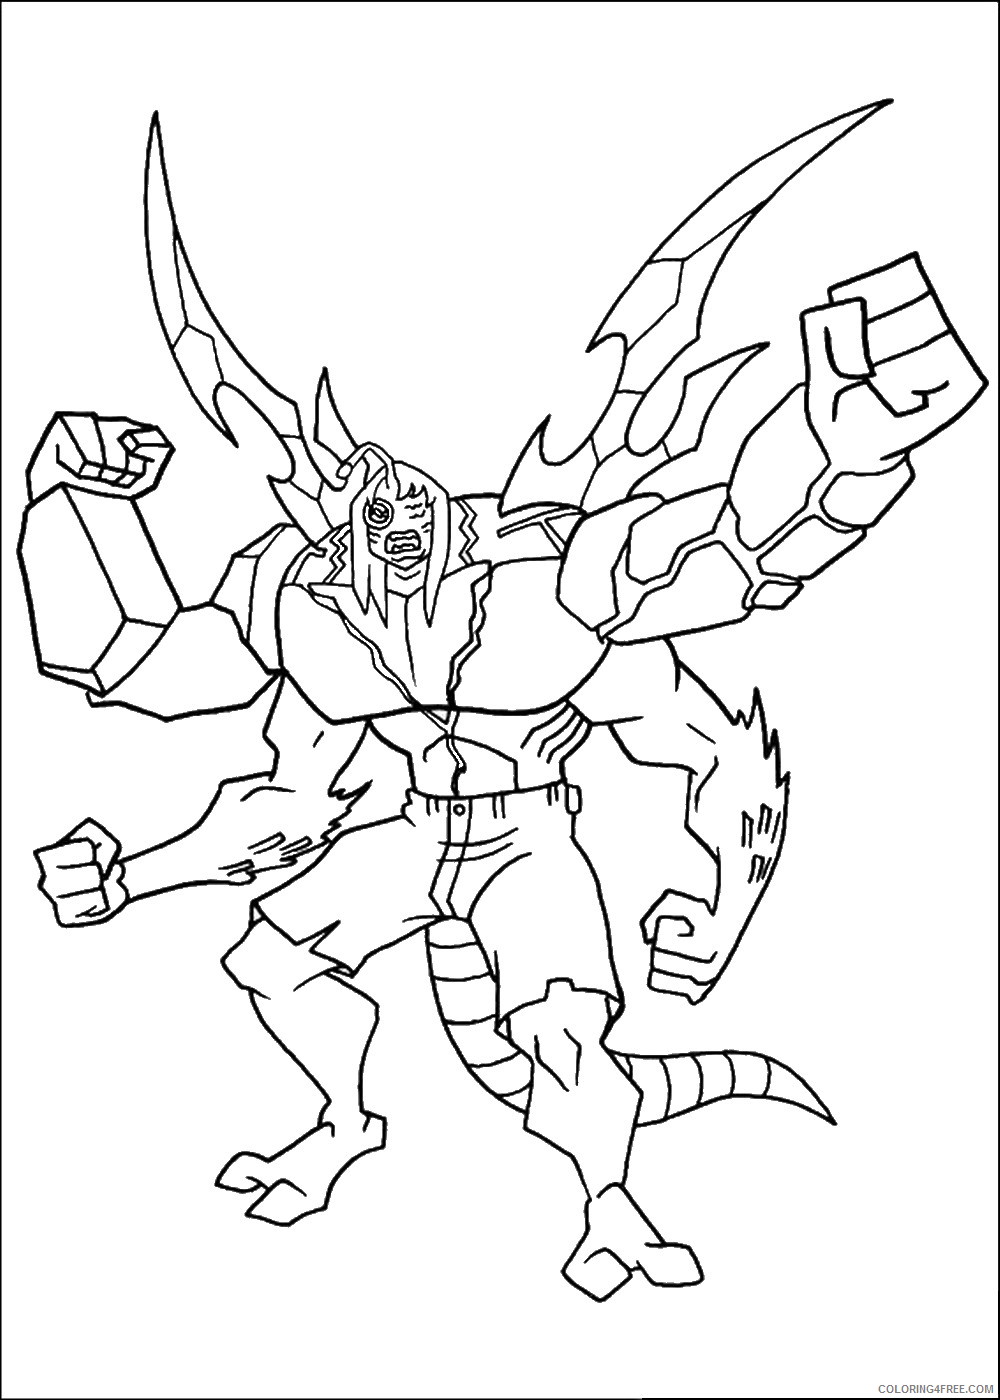 Ben 10 Coloring Pages Cartoons ben10 44 Printable 2020 1223 Coloring4free